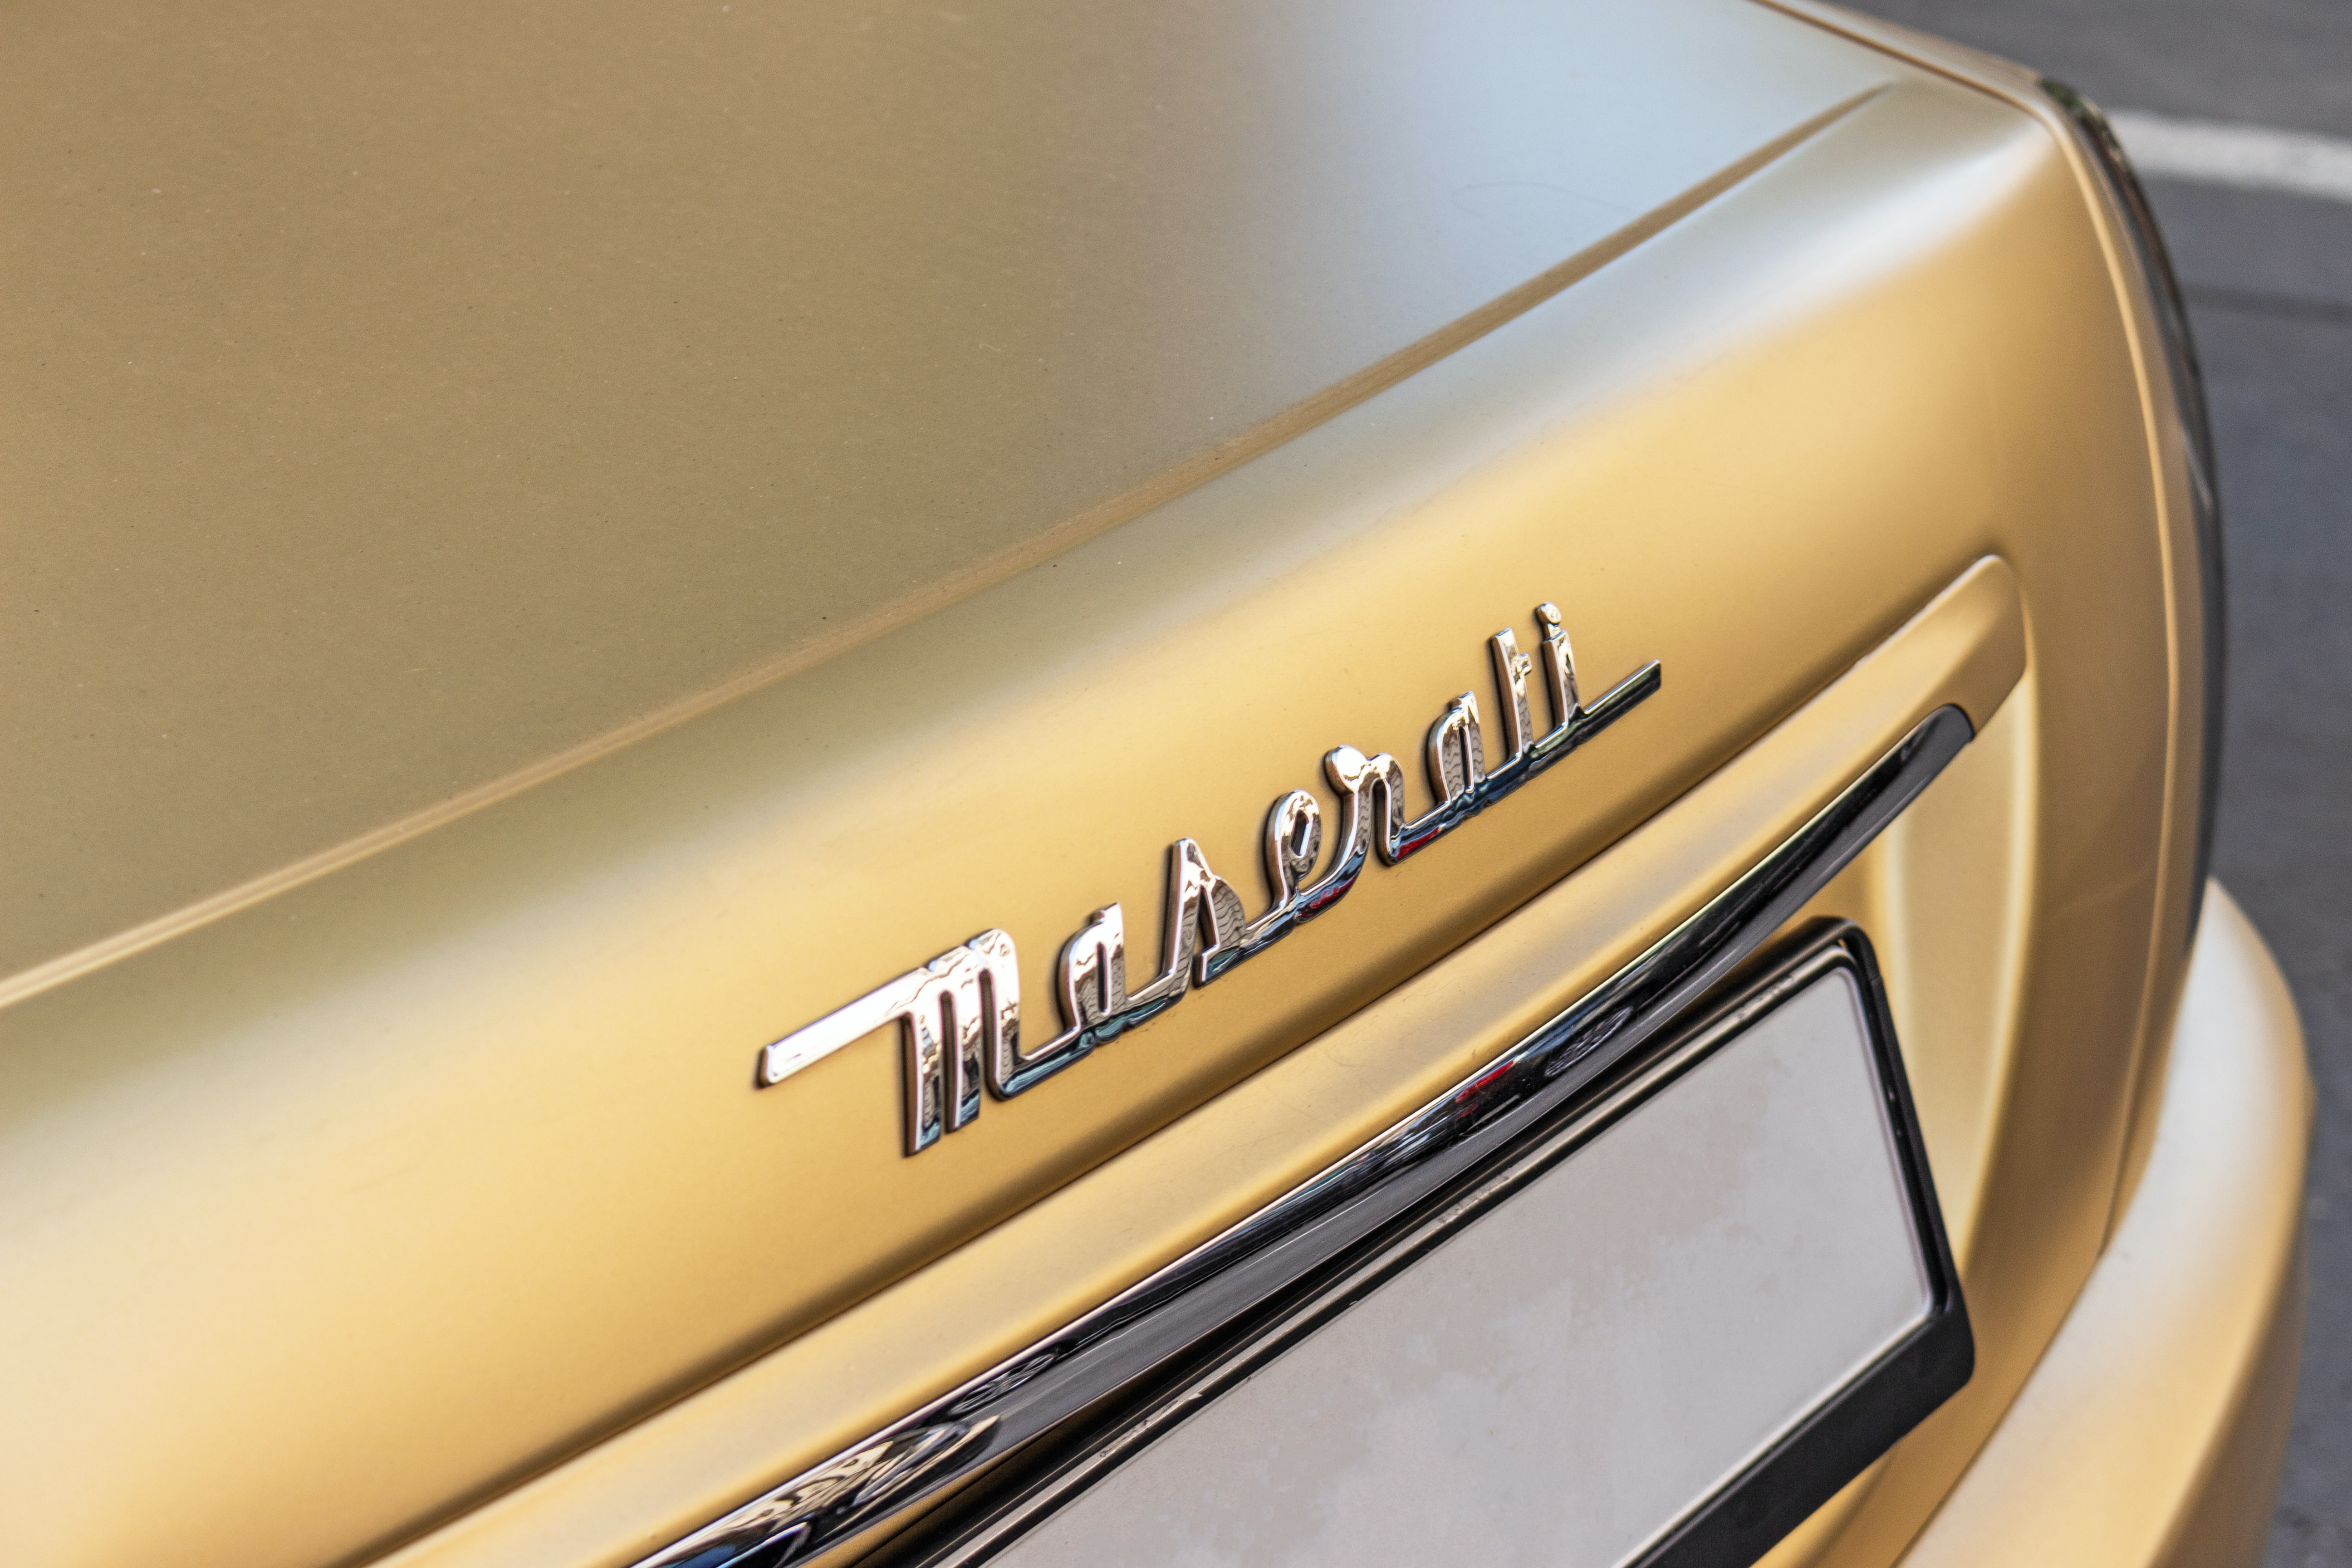 Image of the Maserati name on the back of a gold painted car 